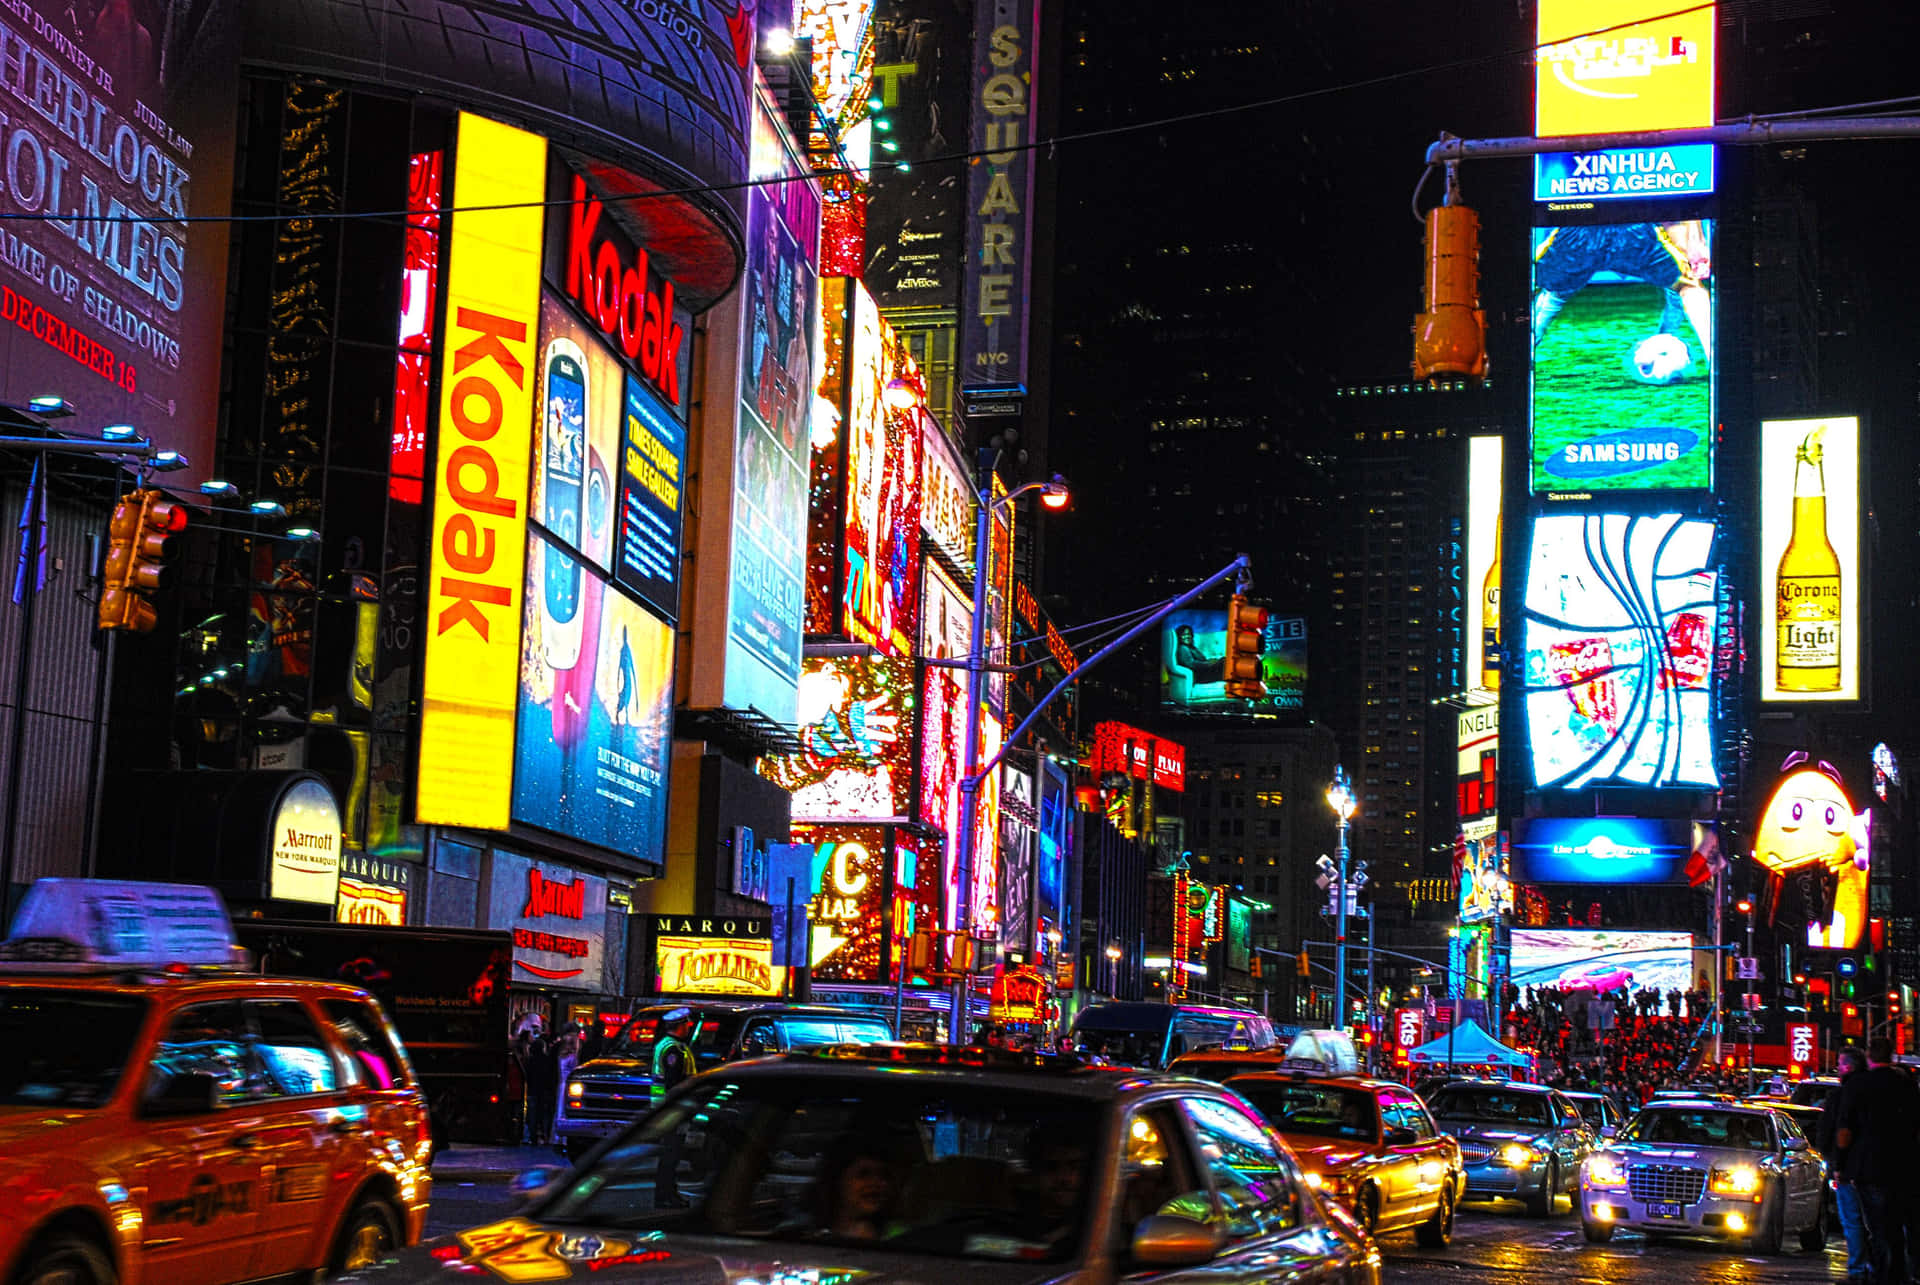 Feel the hustle and bustle of the bright lights of Times Square. Wallpaper